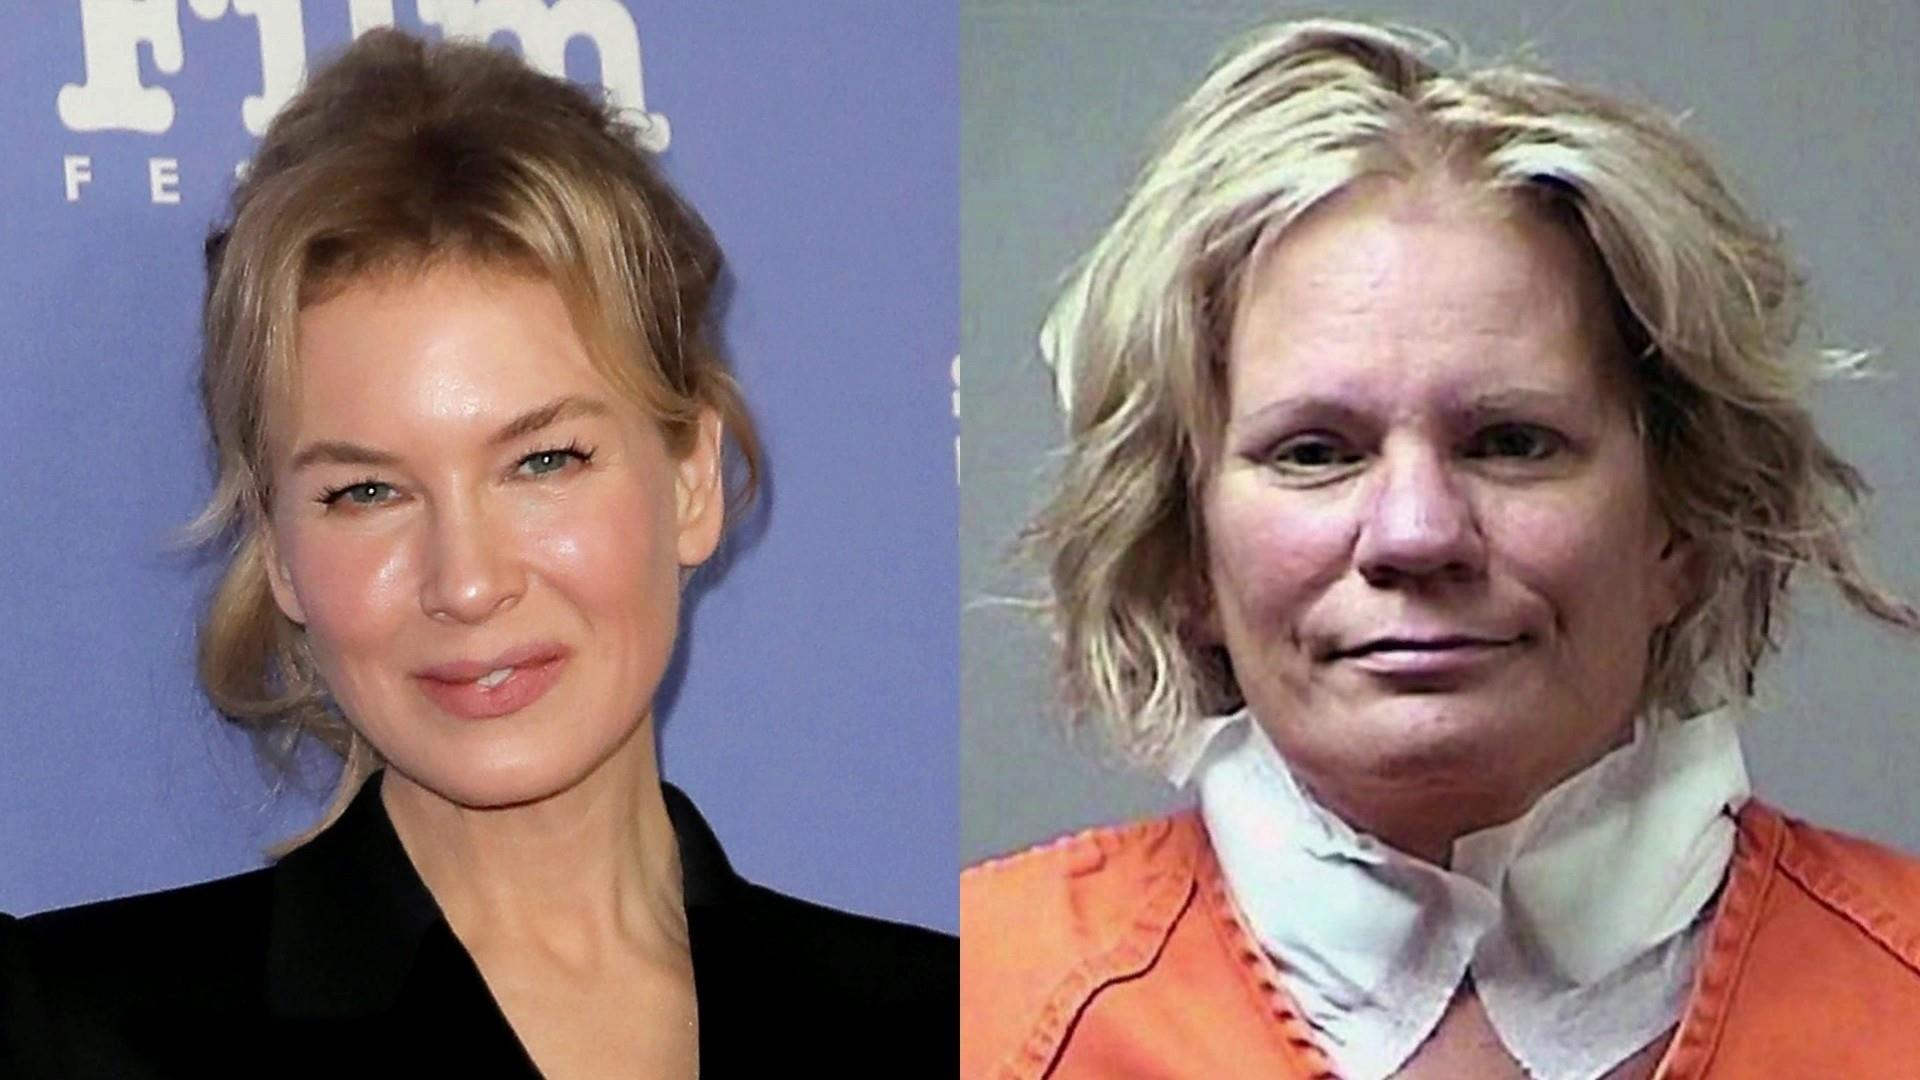 Renee Zellweger will star in new series ‘The Thing About Pam’